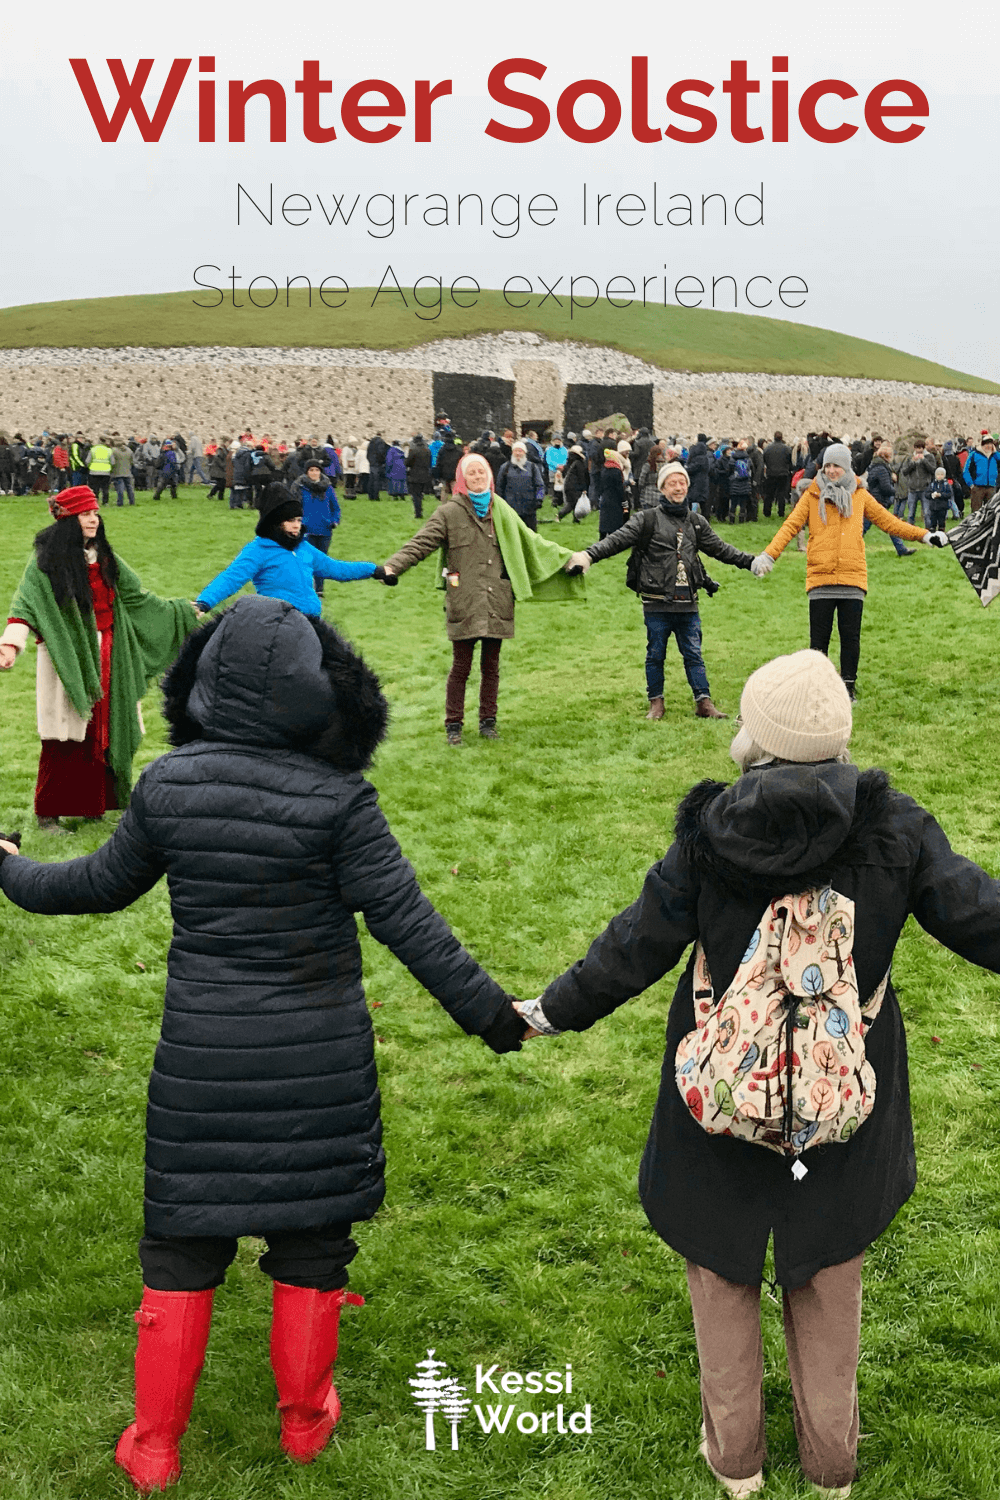 This Pinterest tile shows people enjoying the Winter Solstice experience at Newgrange in Ireland.  The people are warmly dressed and holding hands on a great lawn in front of the Stone Age relic. 